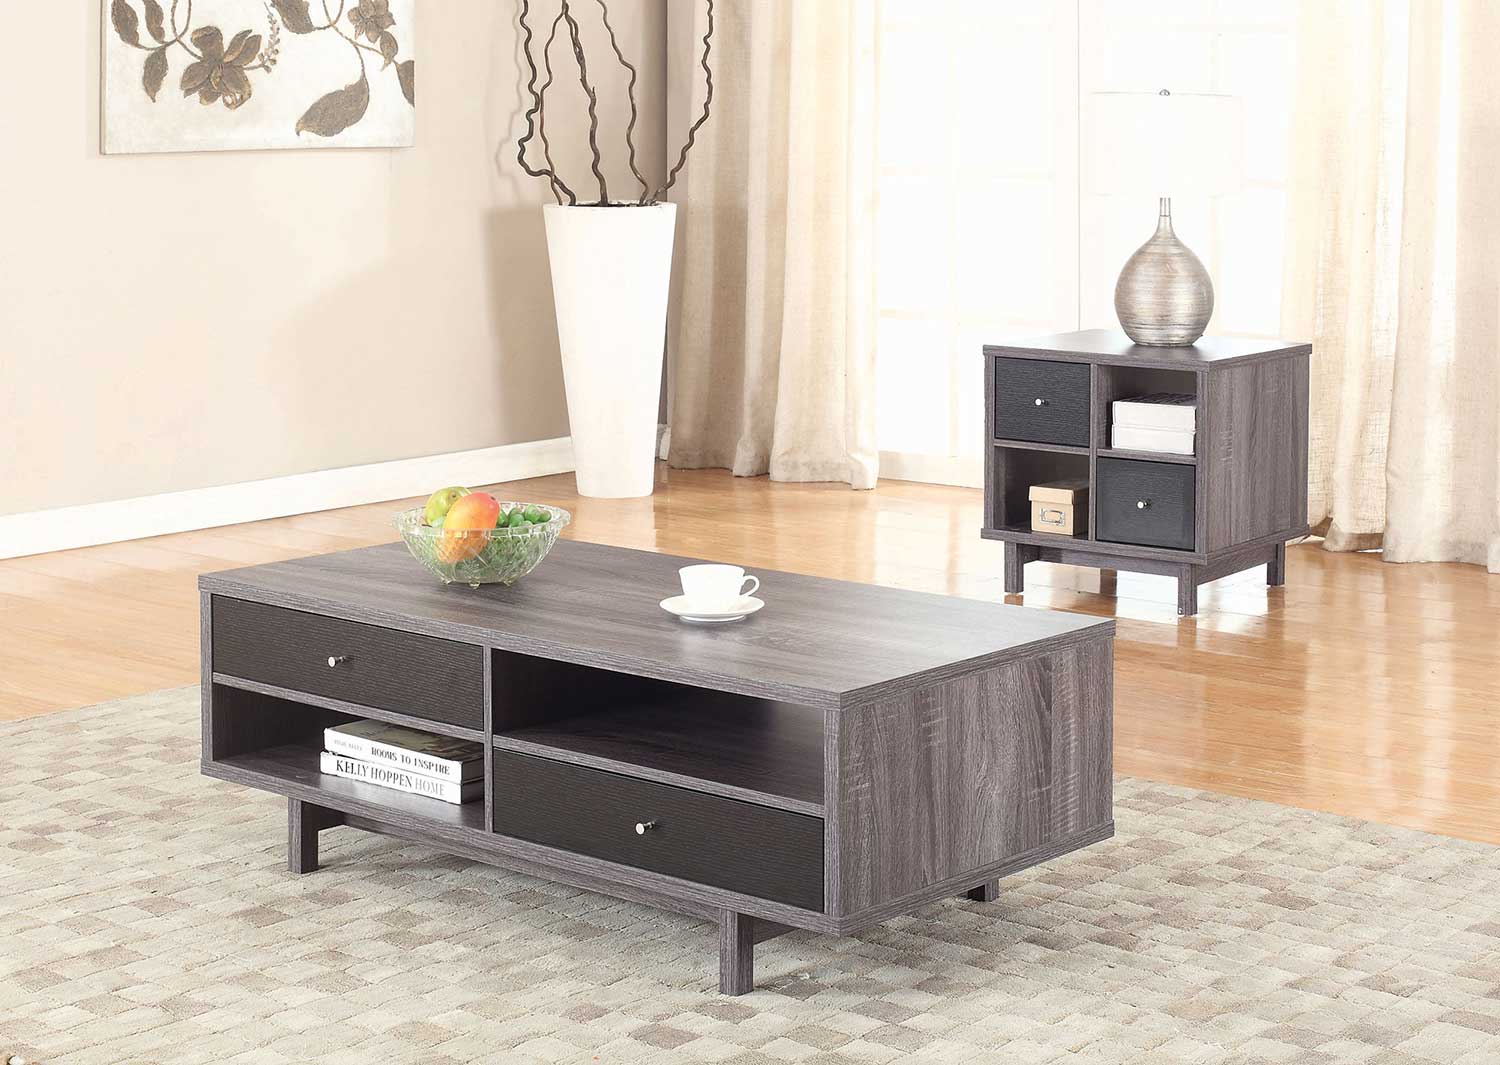 Coaster 705388 Occasional/Coffee Table Set - Antique Grey/Black